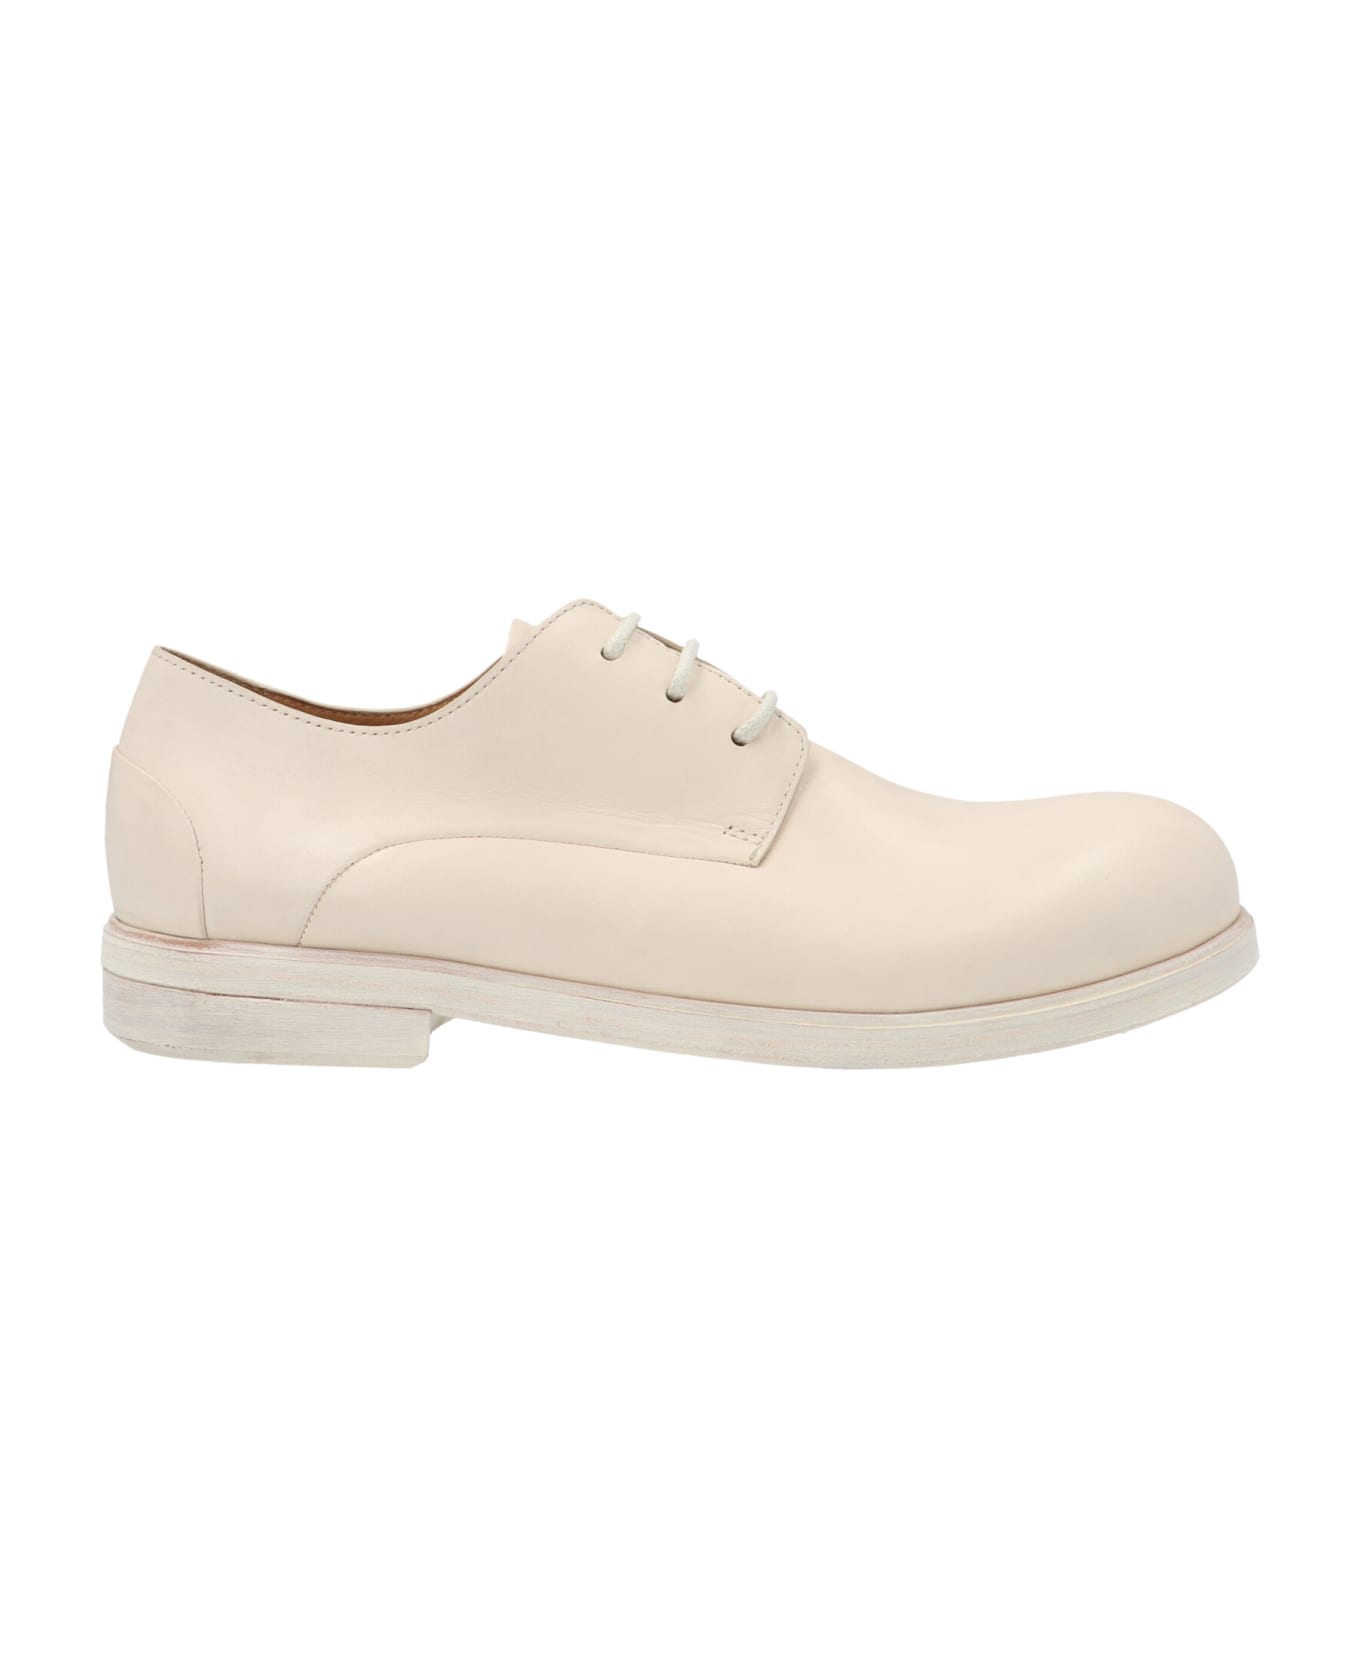 Marsell Zucca Media' Derby Shoes - White フラットシューズ